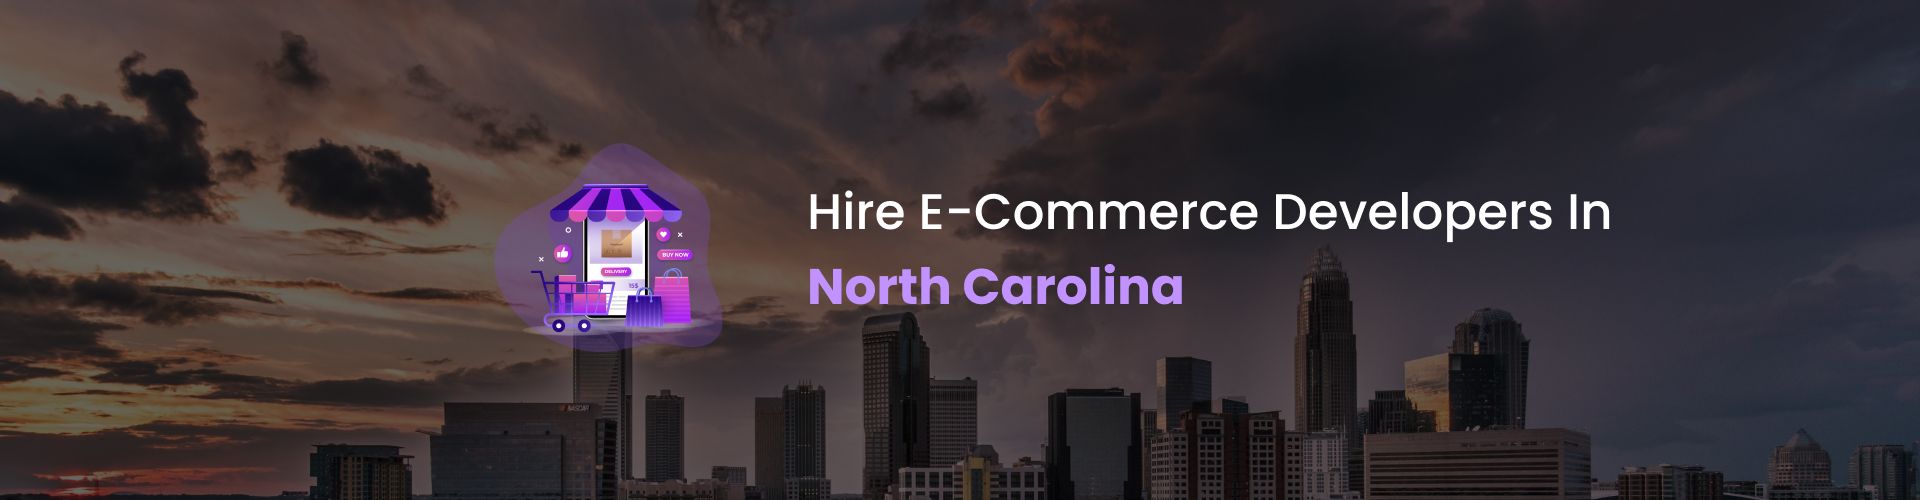 hire ecommerce developers in north carolina